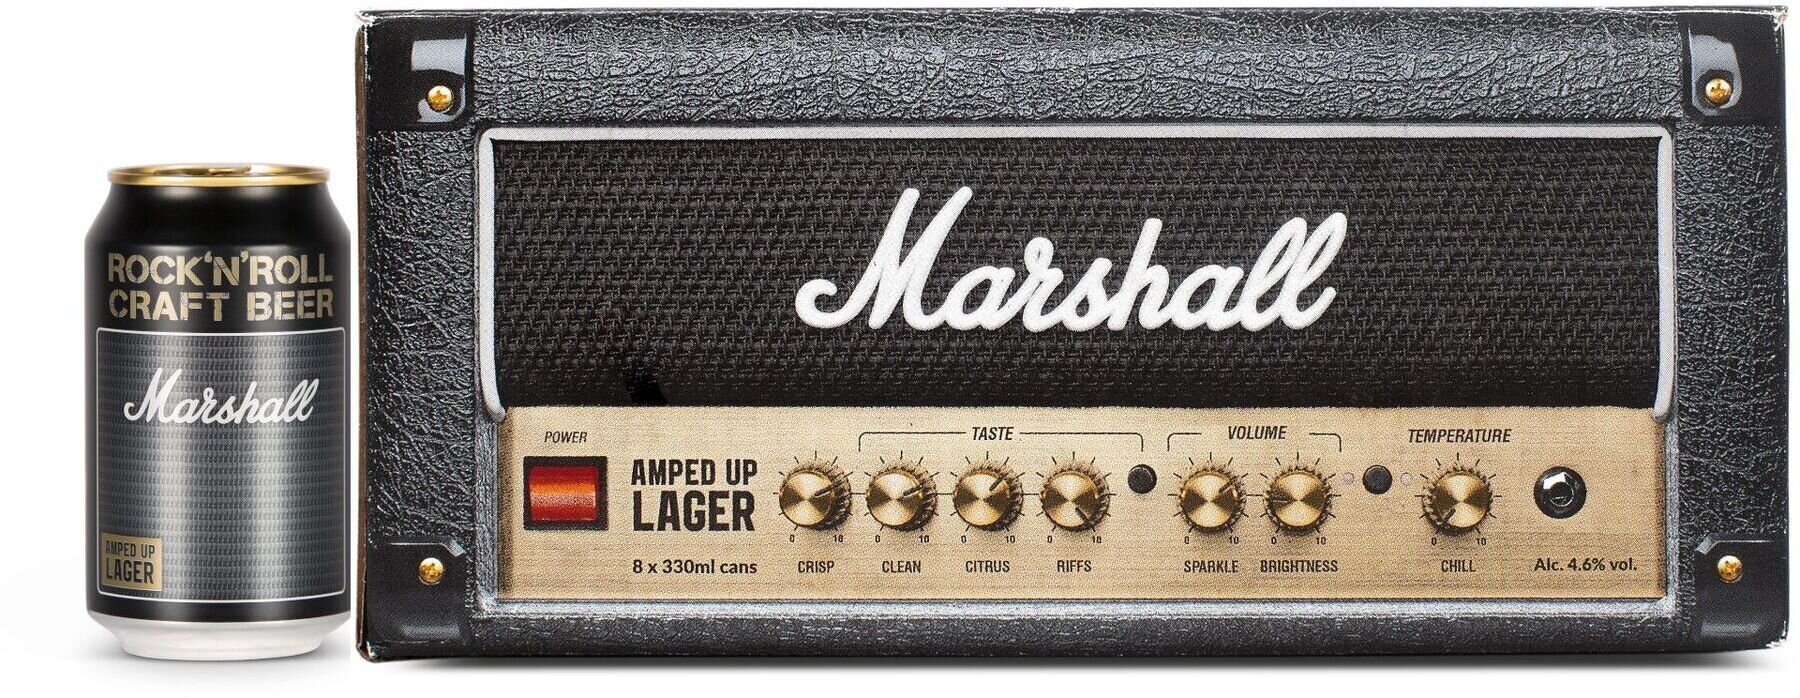 Bier Marshall Amped Up Lager Can Bier